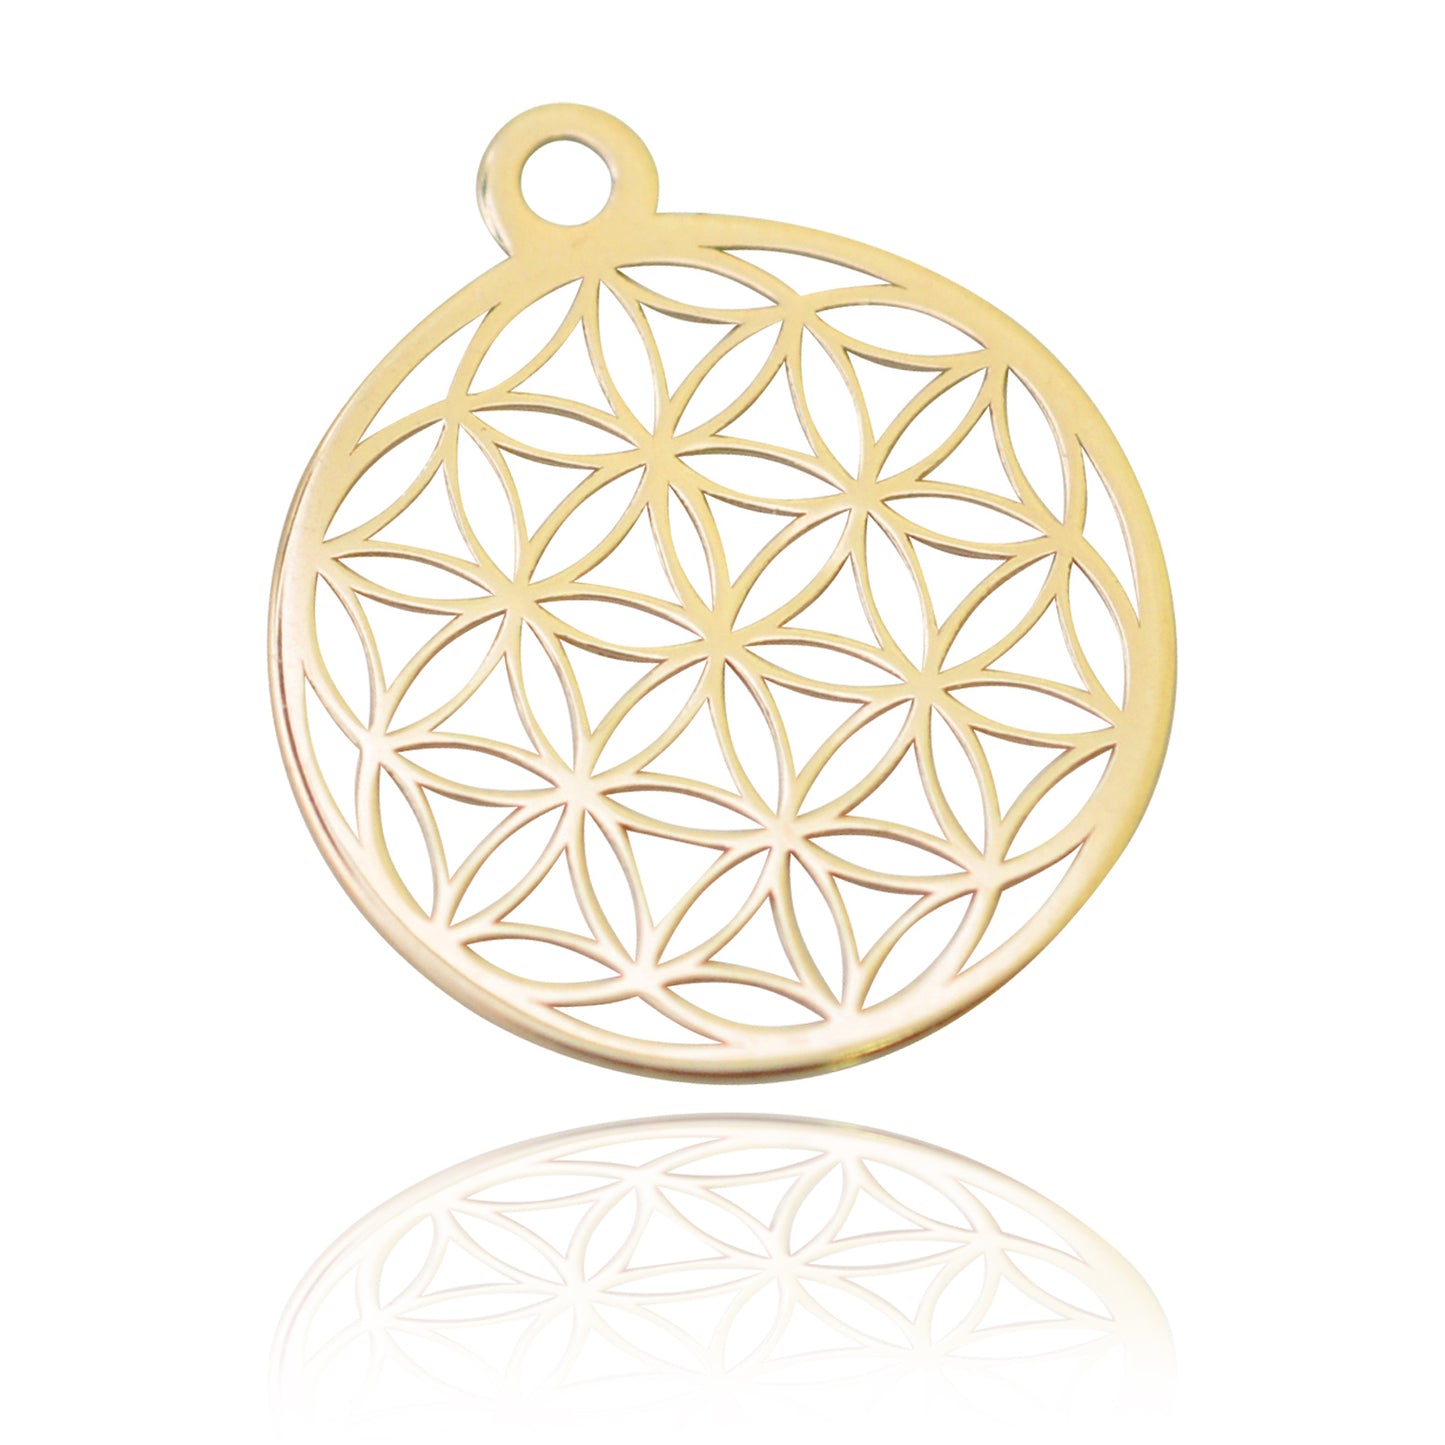 Pendant "Flower of Life" // 925 silver gold plated // Ø 14mm